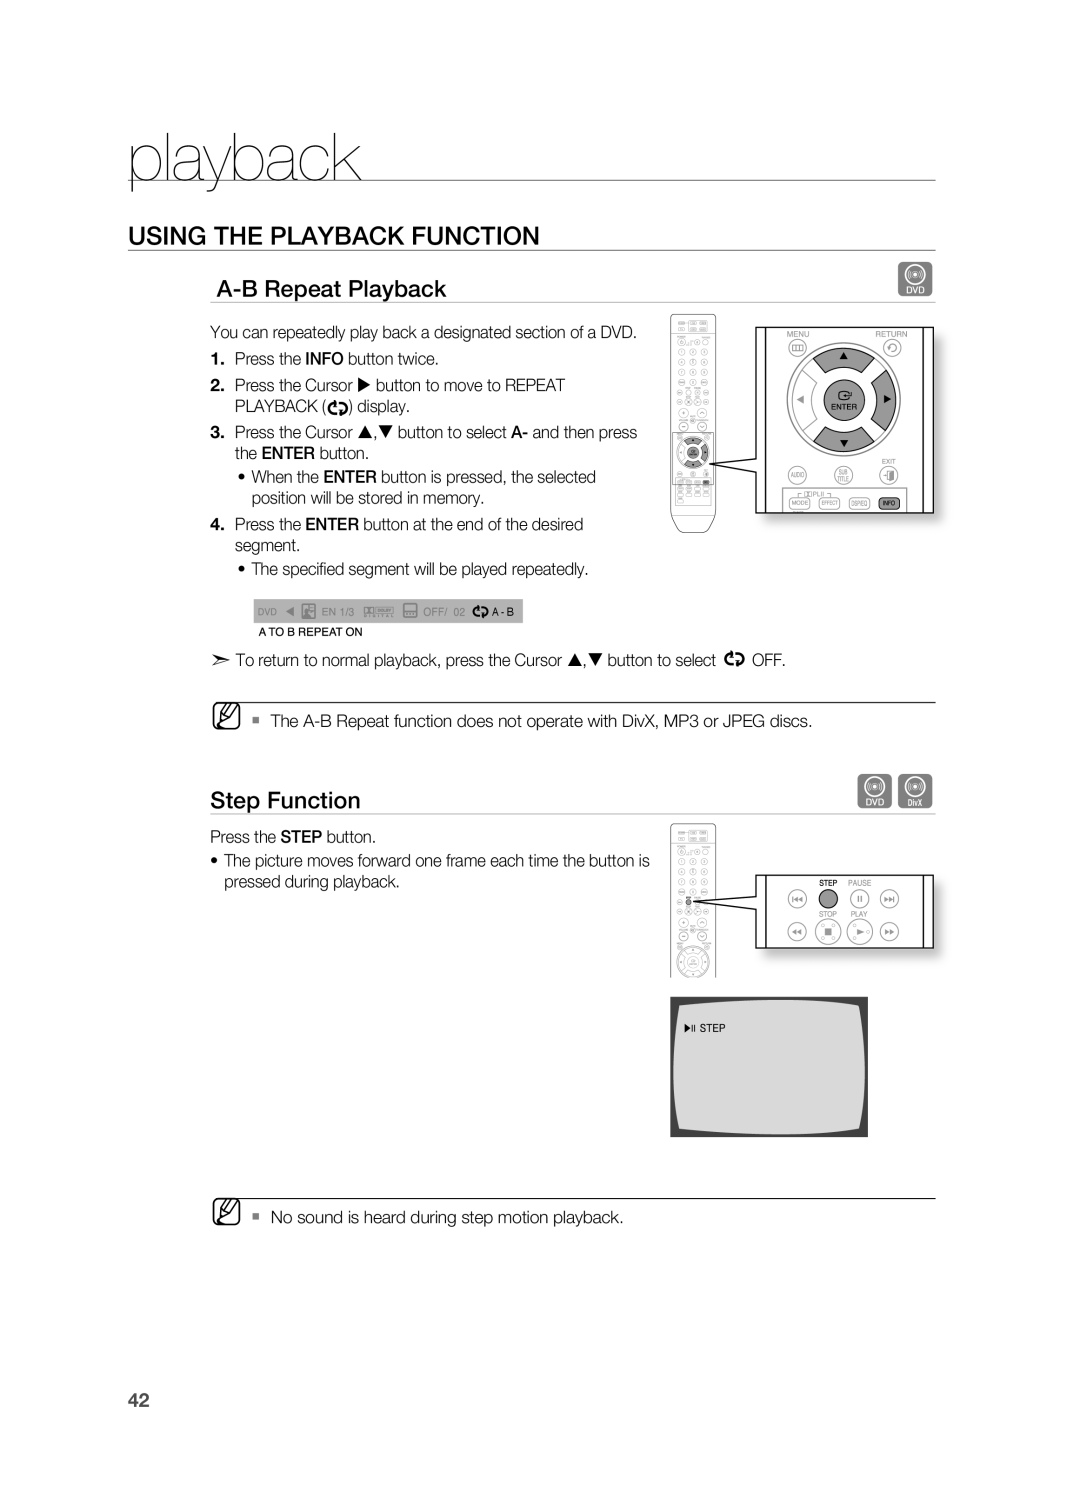 Samsung HT-TWZ315 manual A-Brepeat Playback, Step function, playback, USinG tHE PLAyBACK fUnCtiOn 